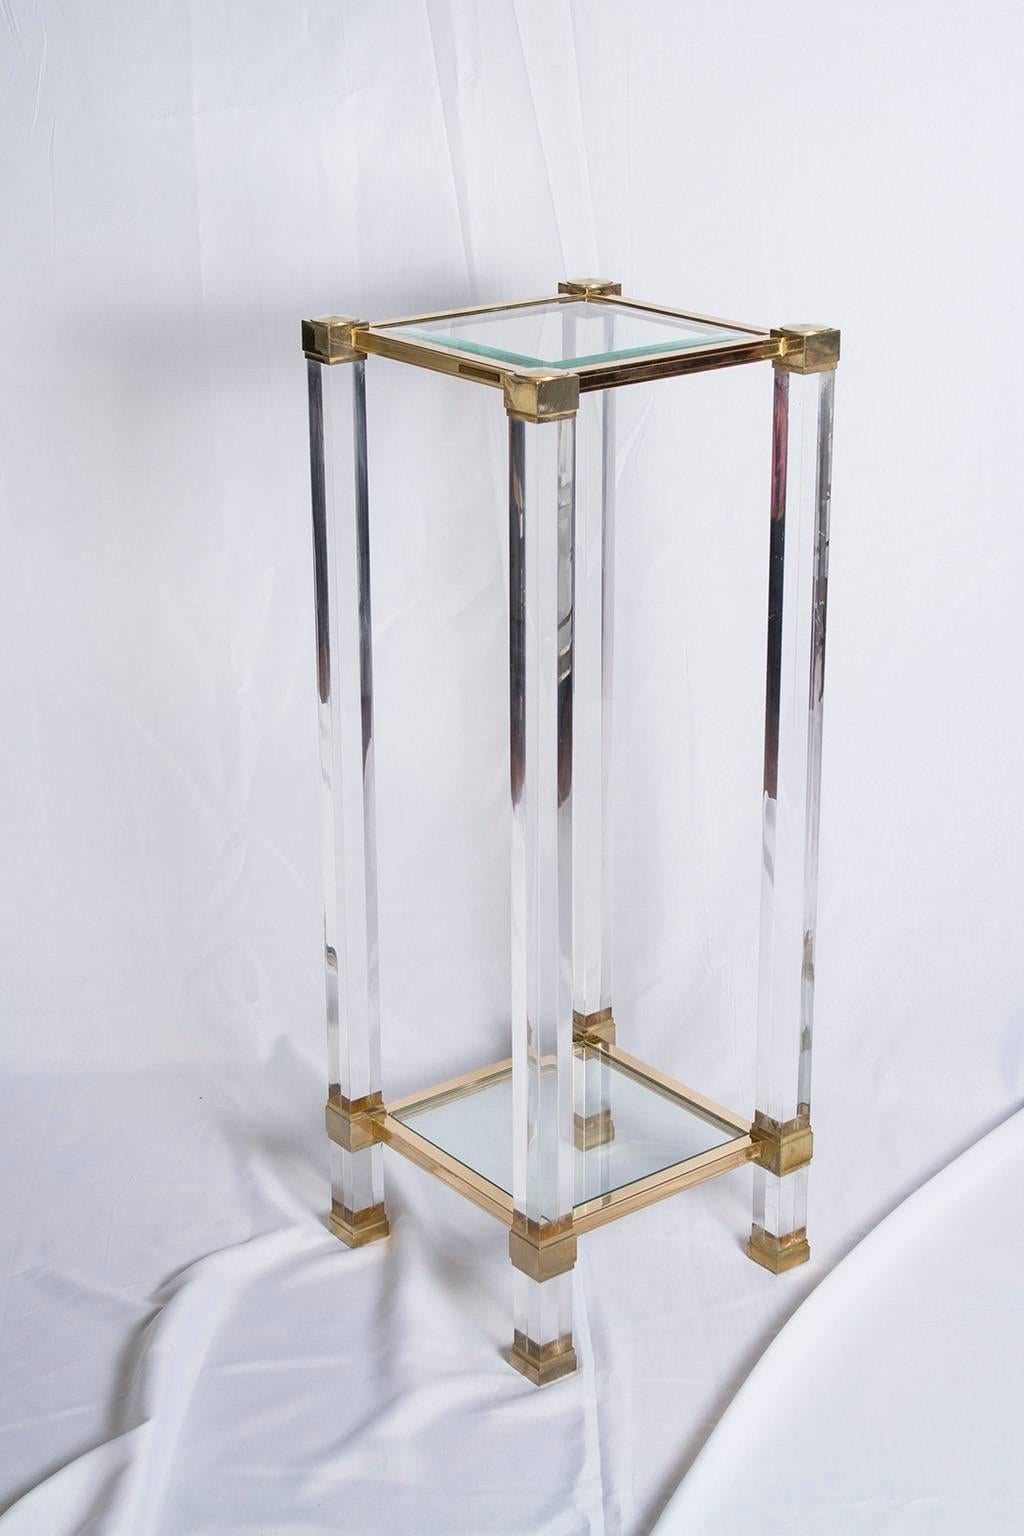 French brassed metal, Lucite and glass column signed "Pierre Vandel," Paris, 1970s.

Please contact us for delivery details.